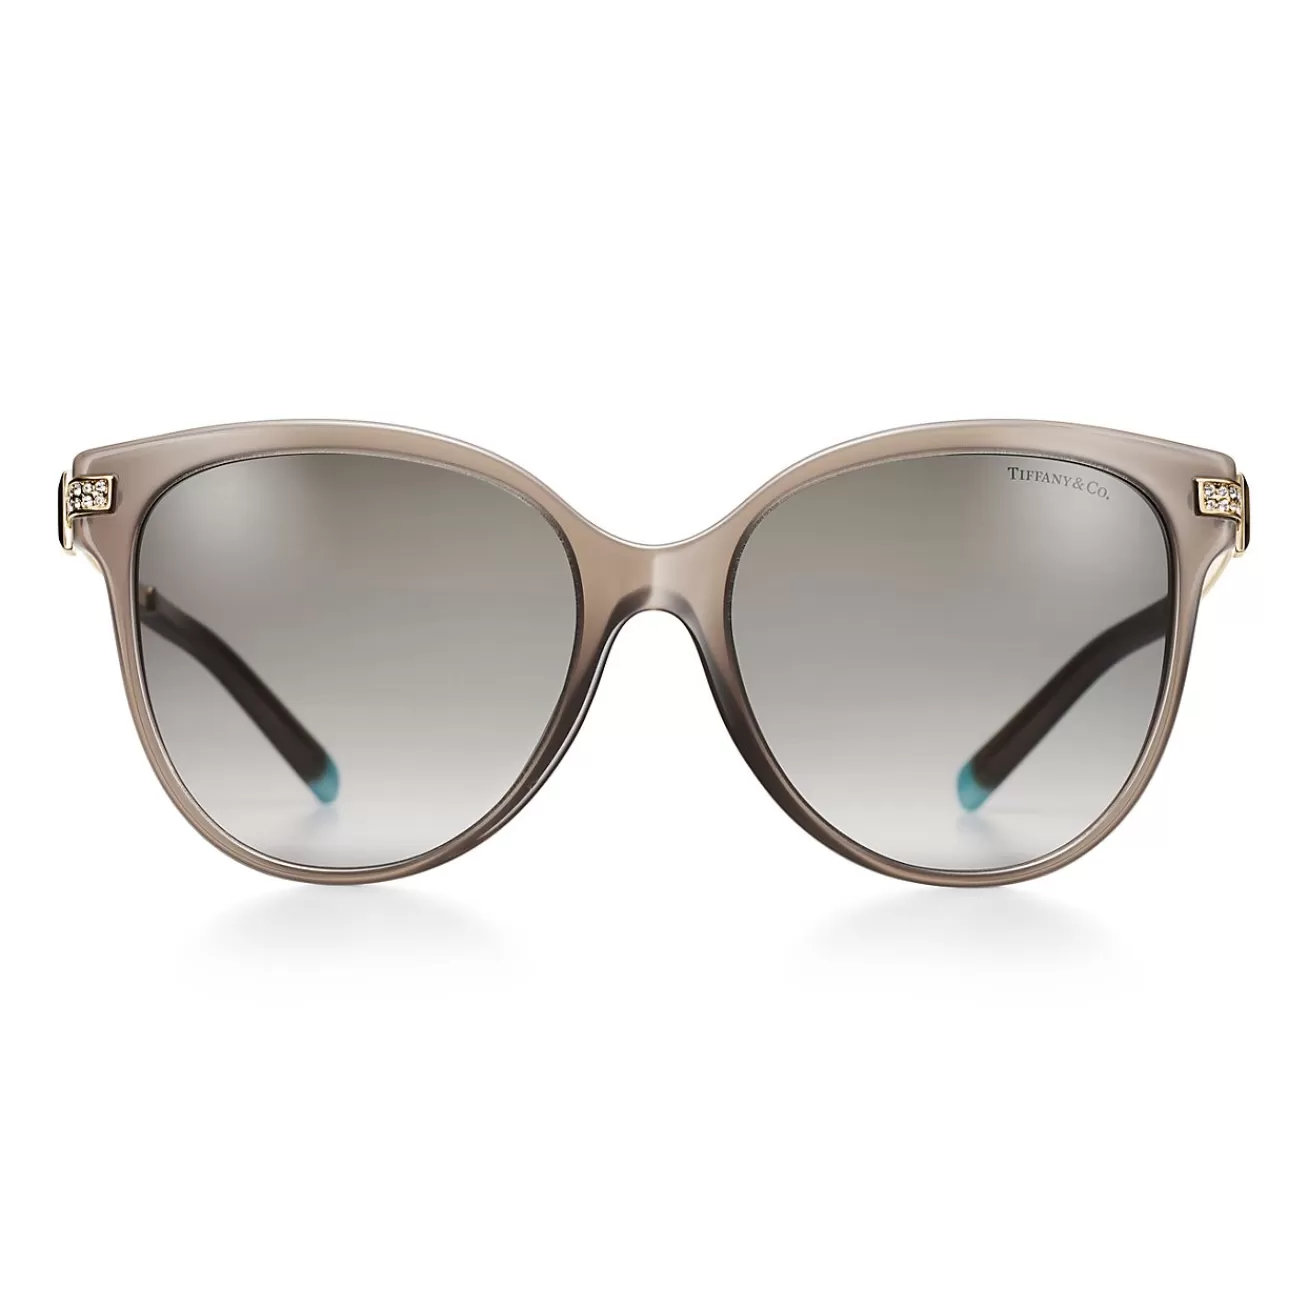 Tiffany & Co. Tiffany T Sunglasses in Opal Taupe Acetate with Gradient Gray Lenses | ^ Tiffany T | Sunglasses